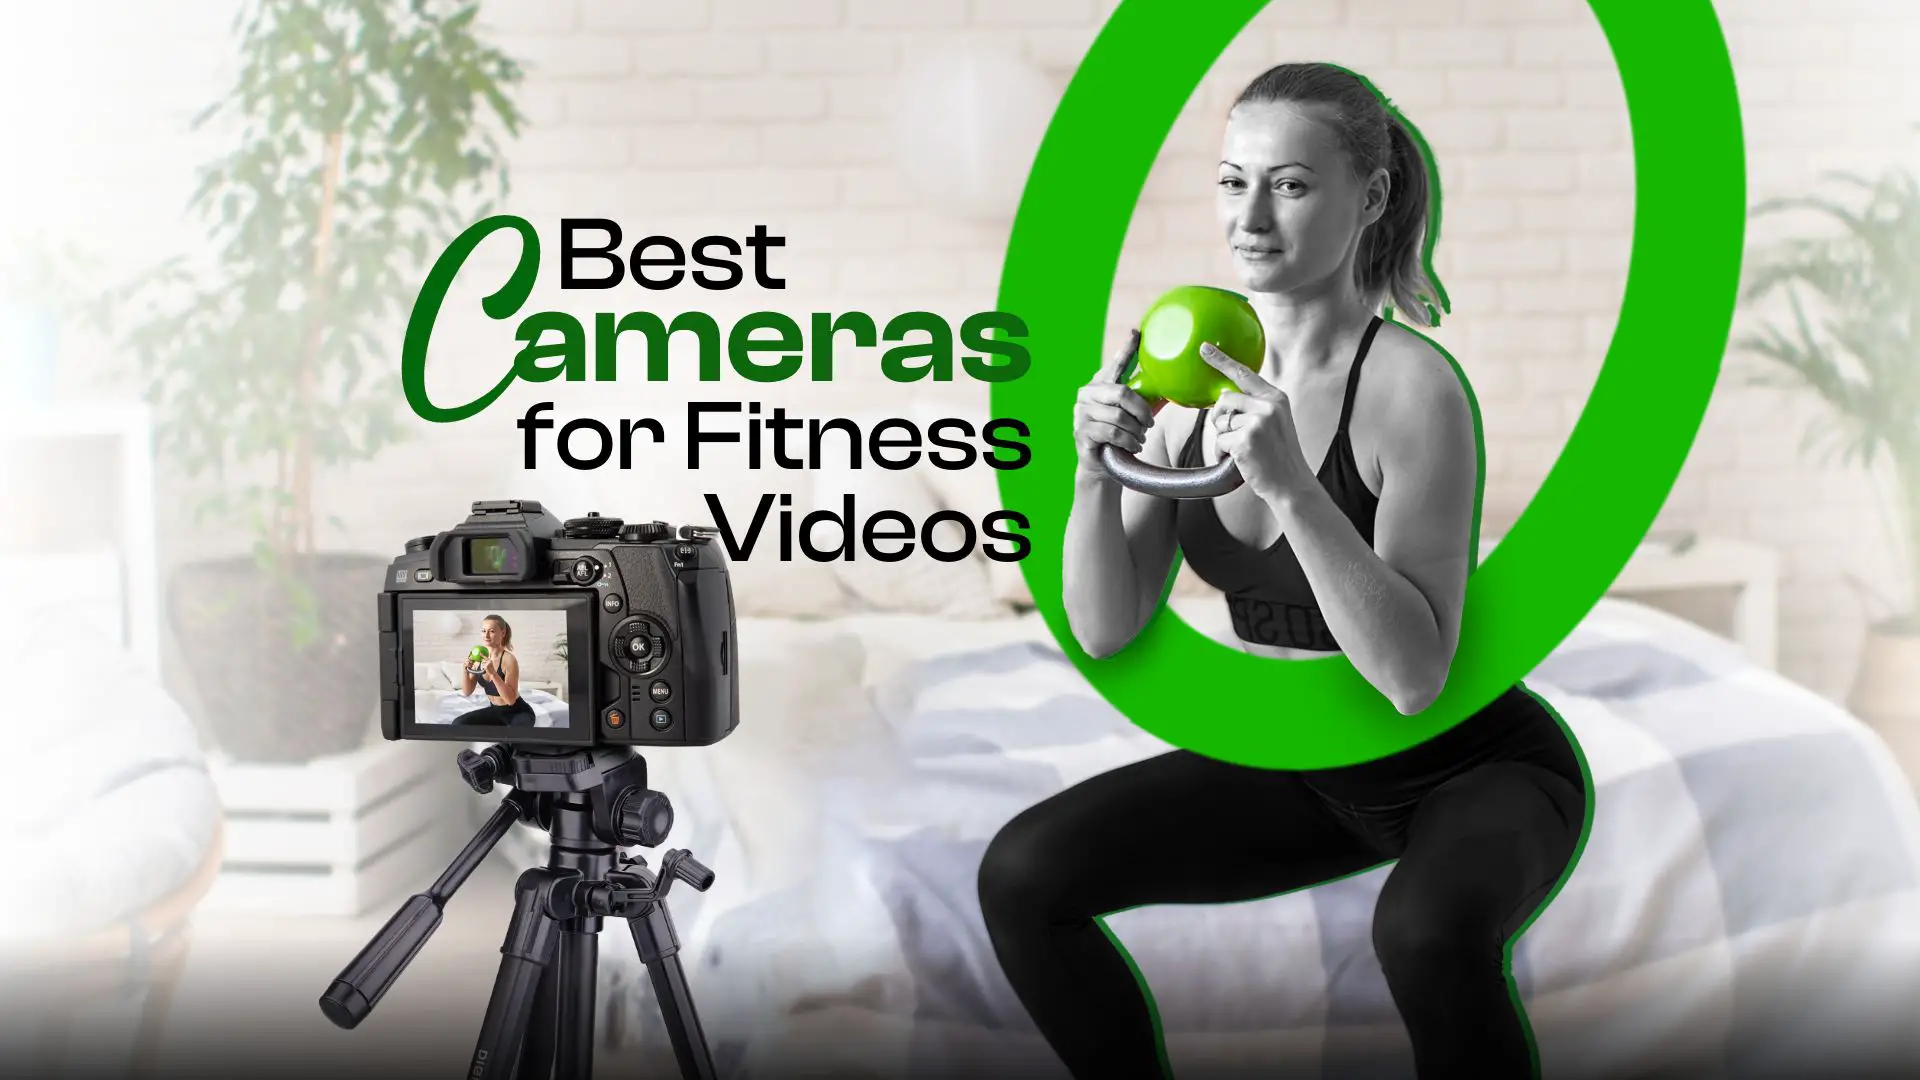 Best Cameras for Fitness Videos